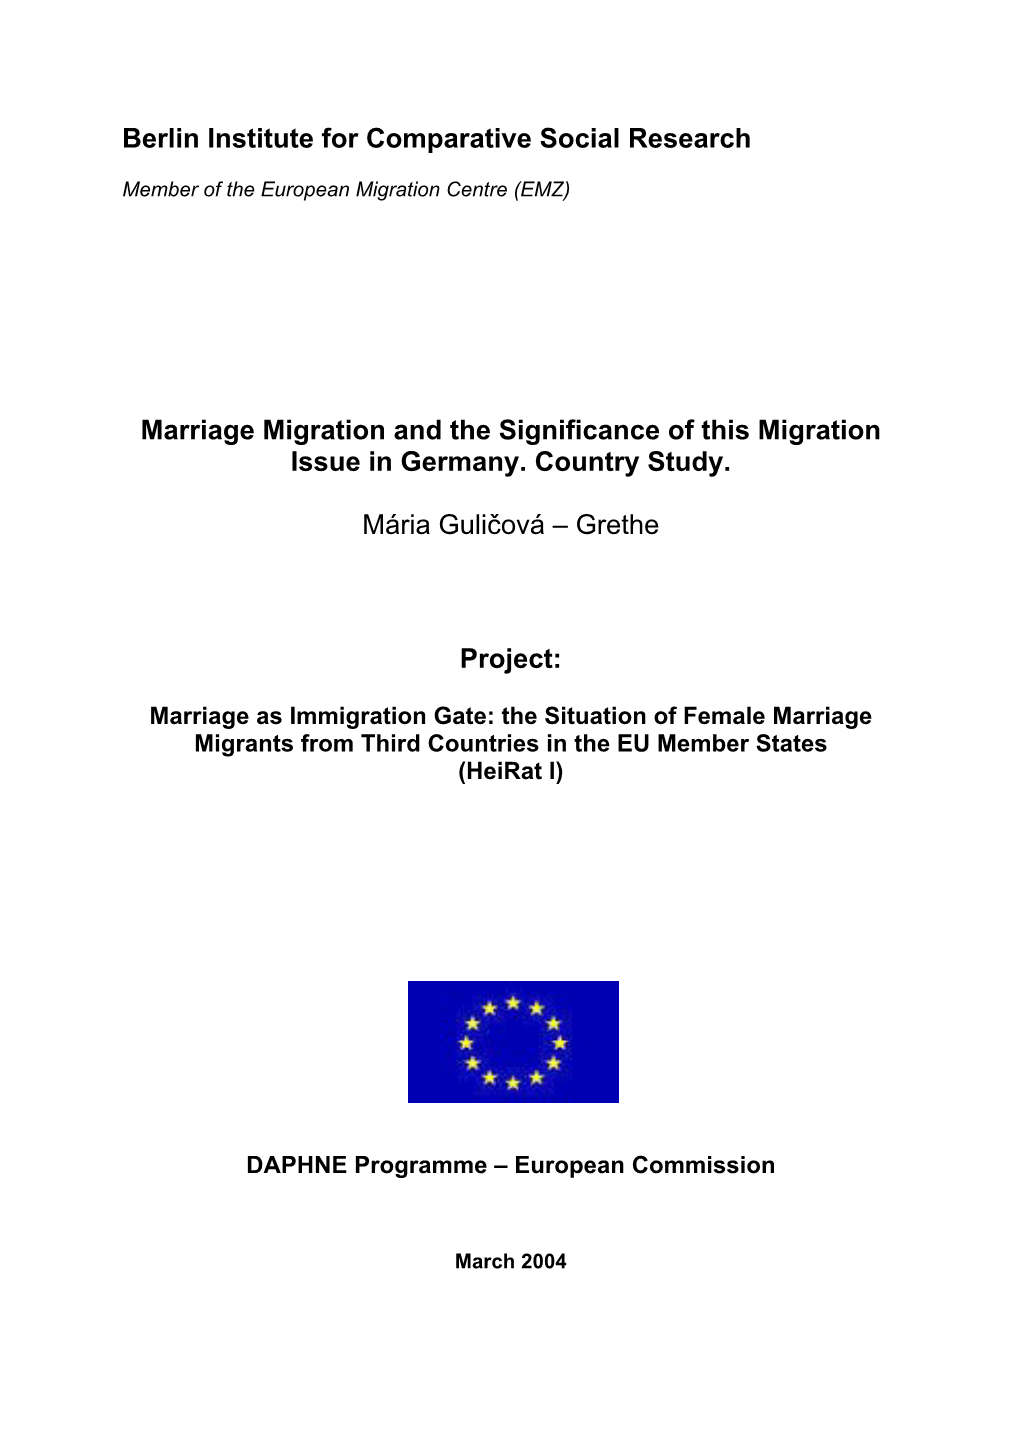 Berlin Institute for Comparative Social Research Marriage Migration And